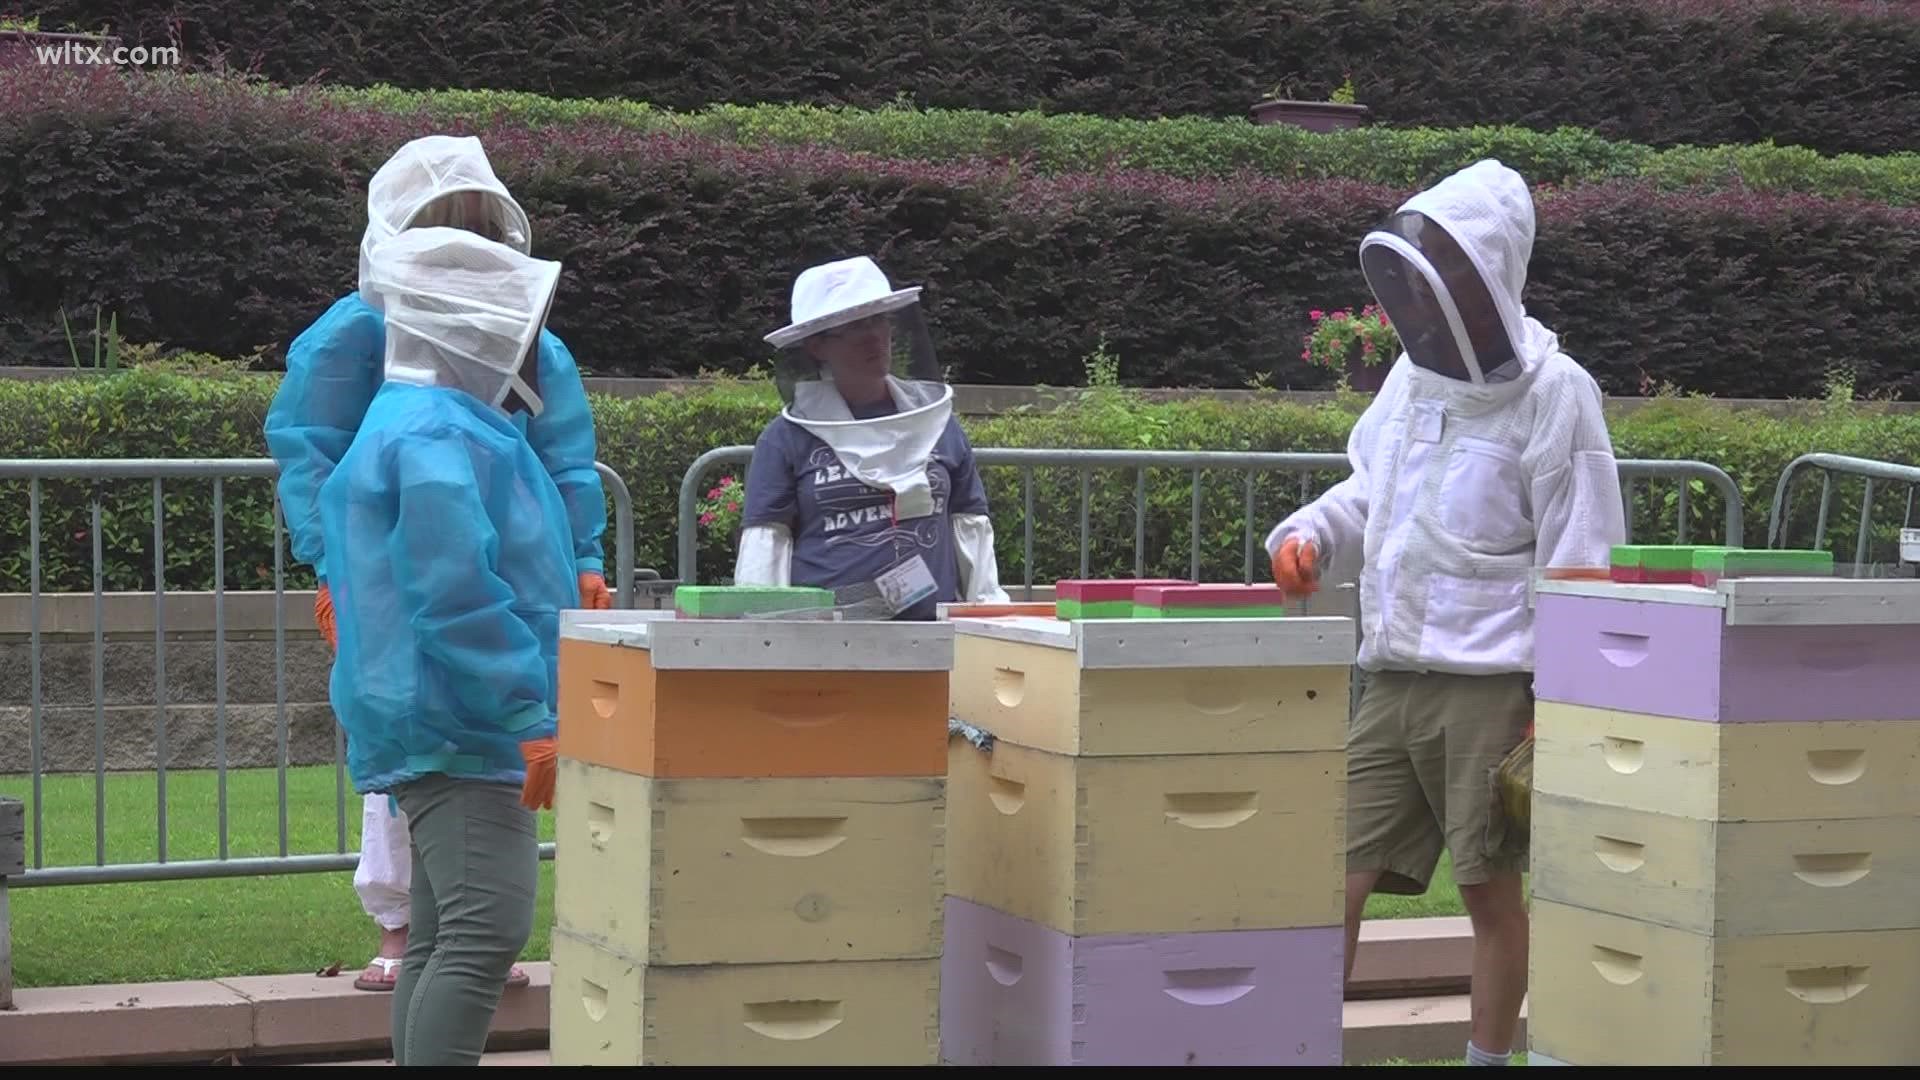 The conference will last for three days with today's focus being on an introduction to beekeeping for newbies.